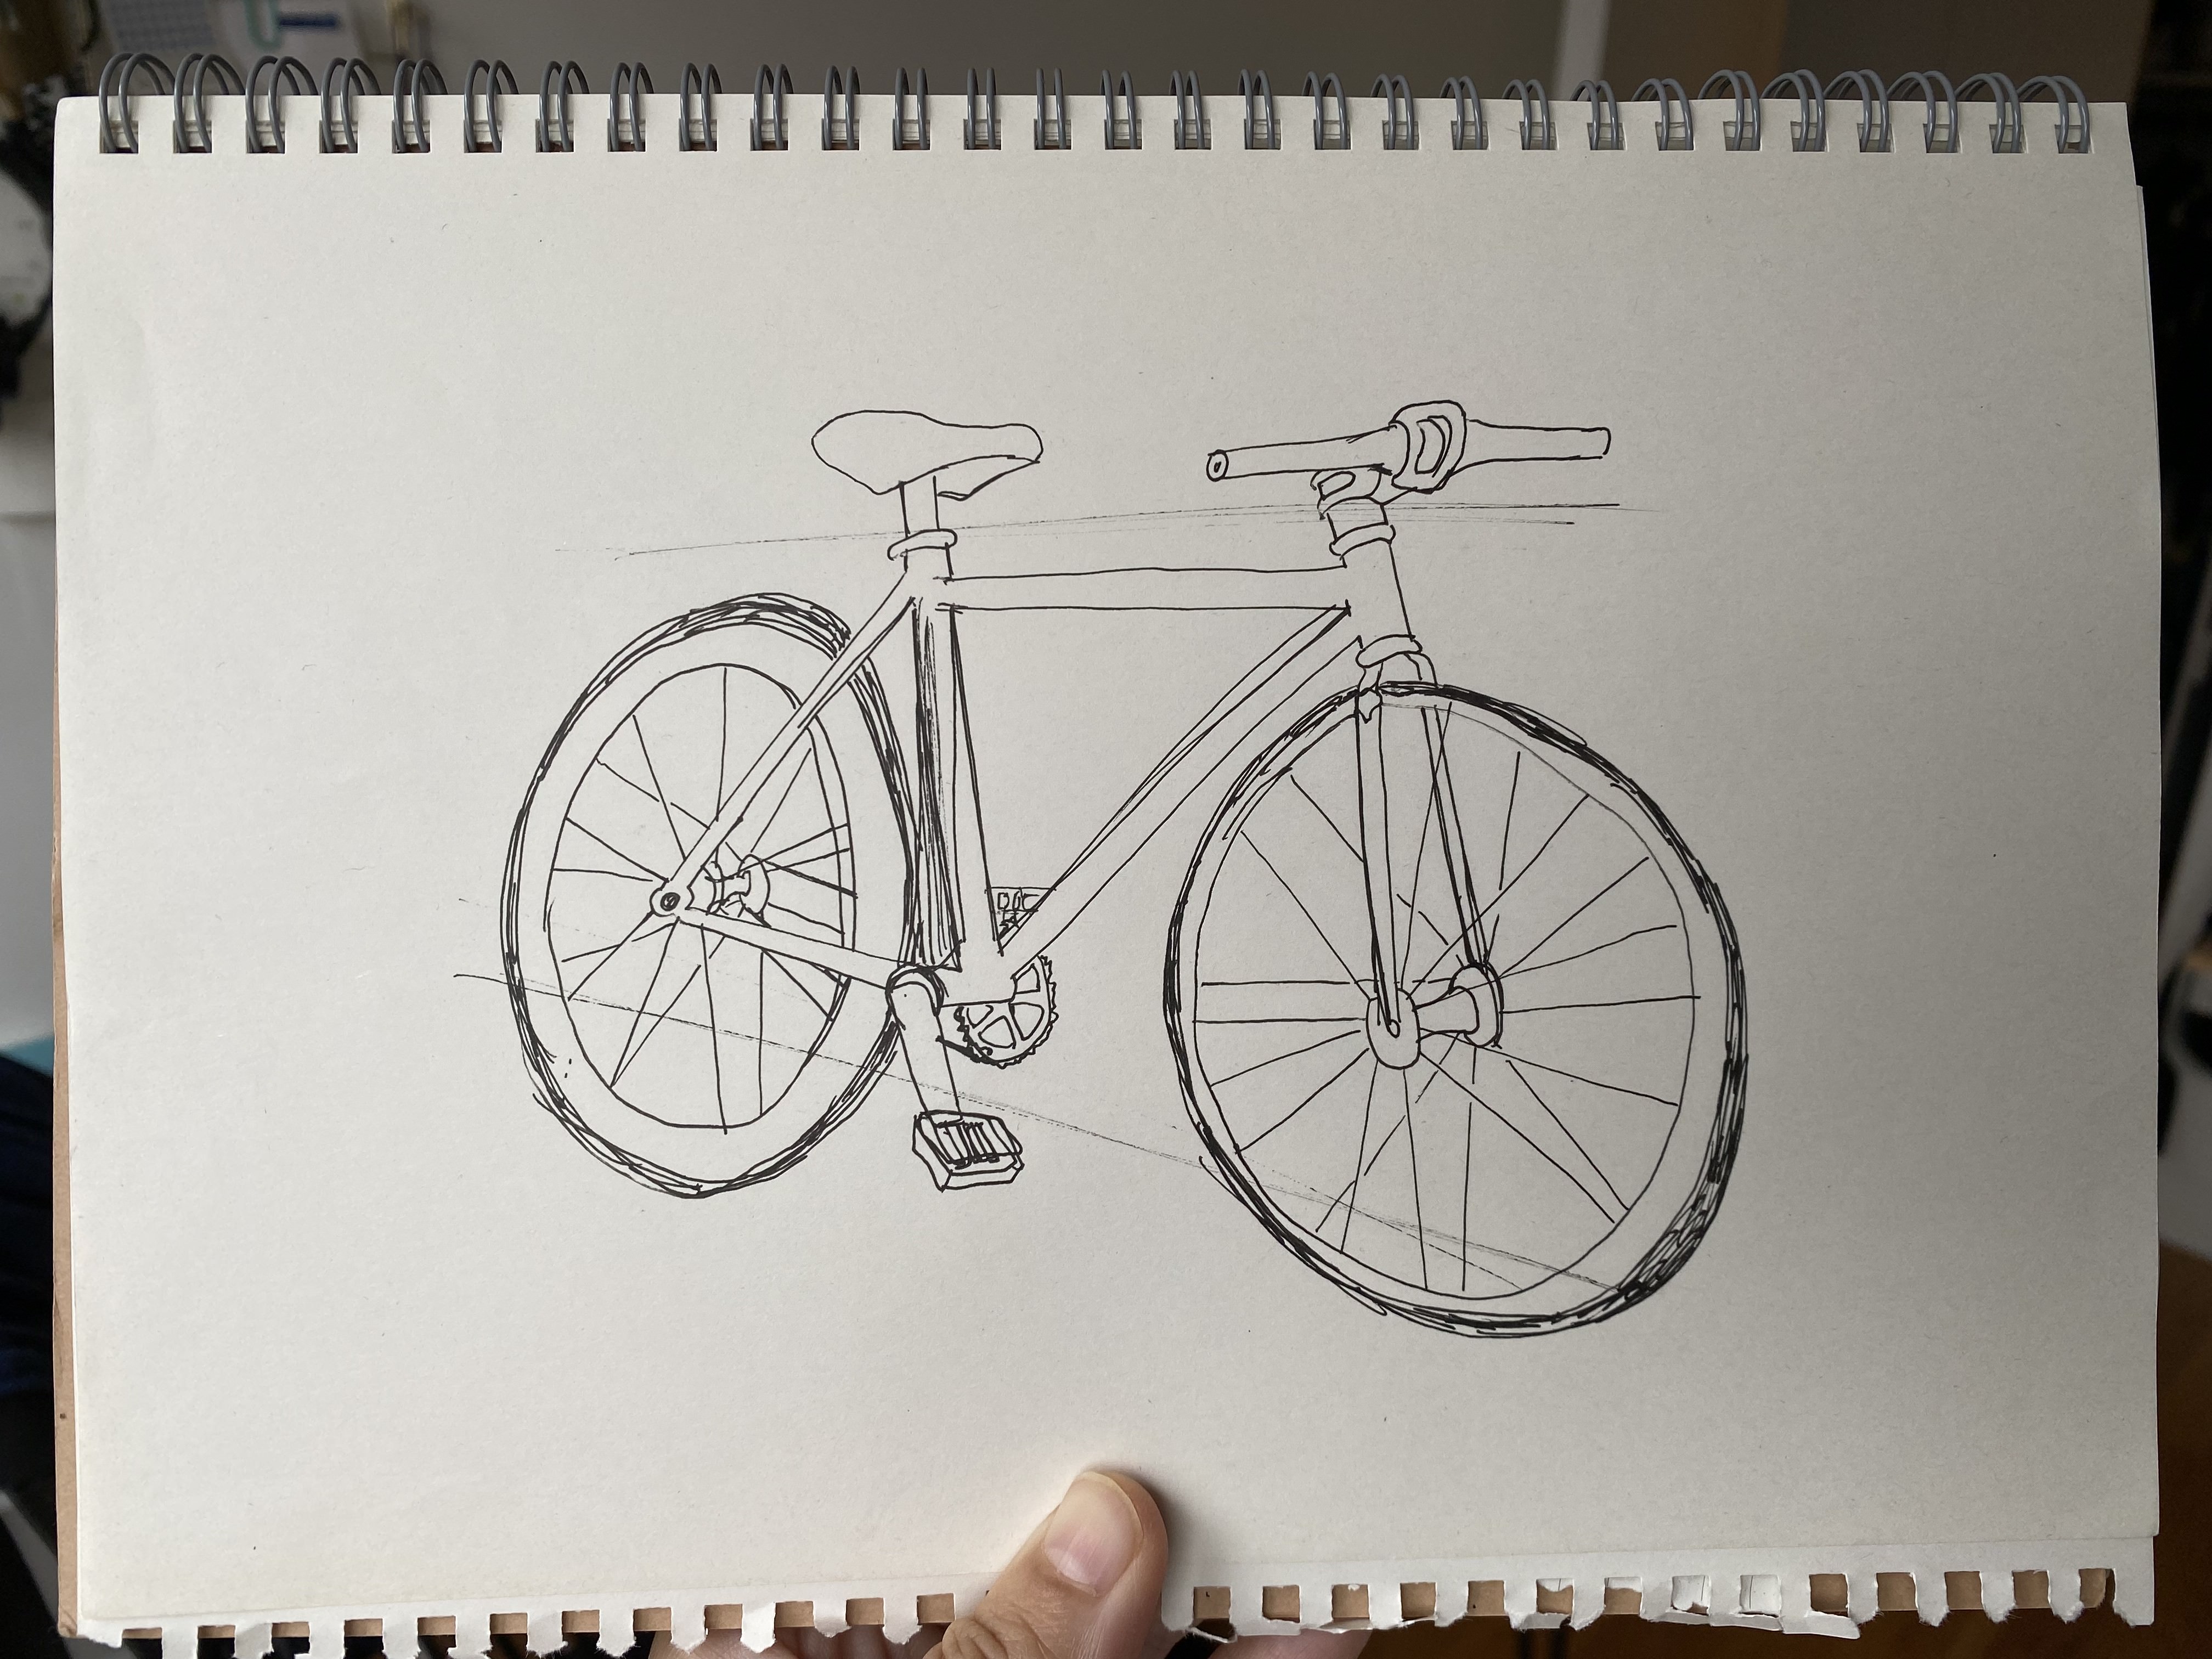 A less rudimentary sketch of a bicycle